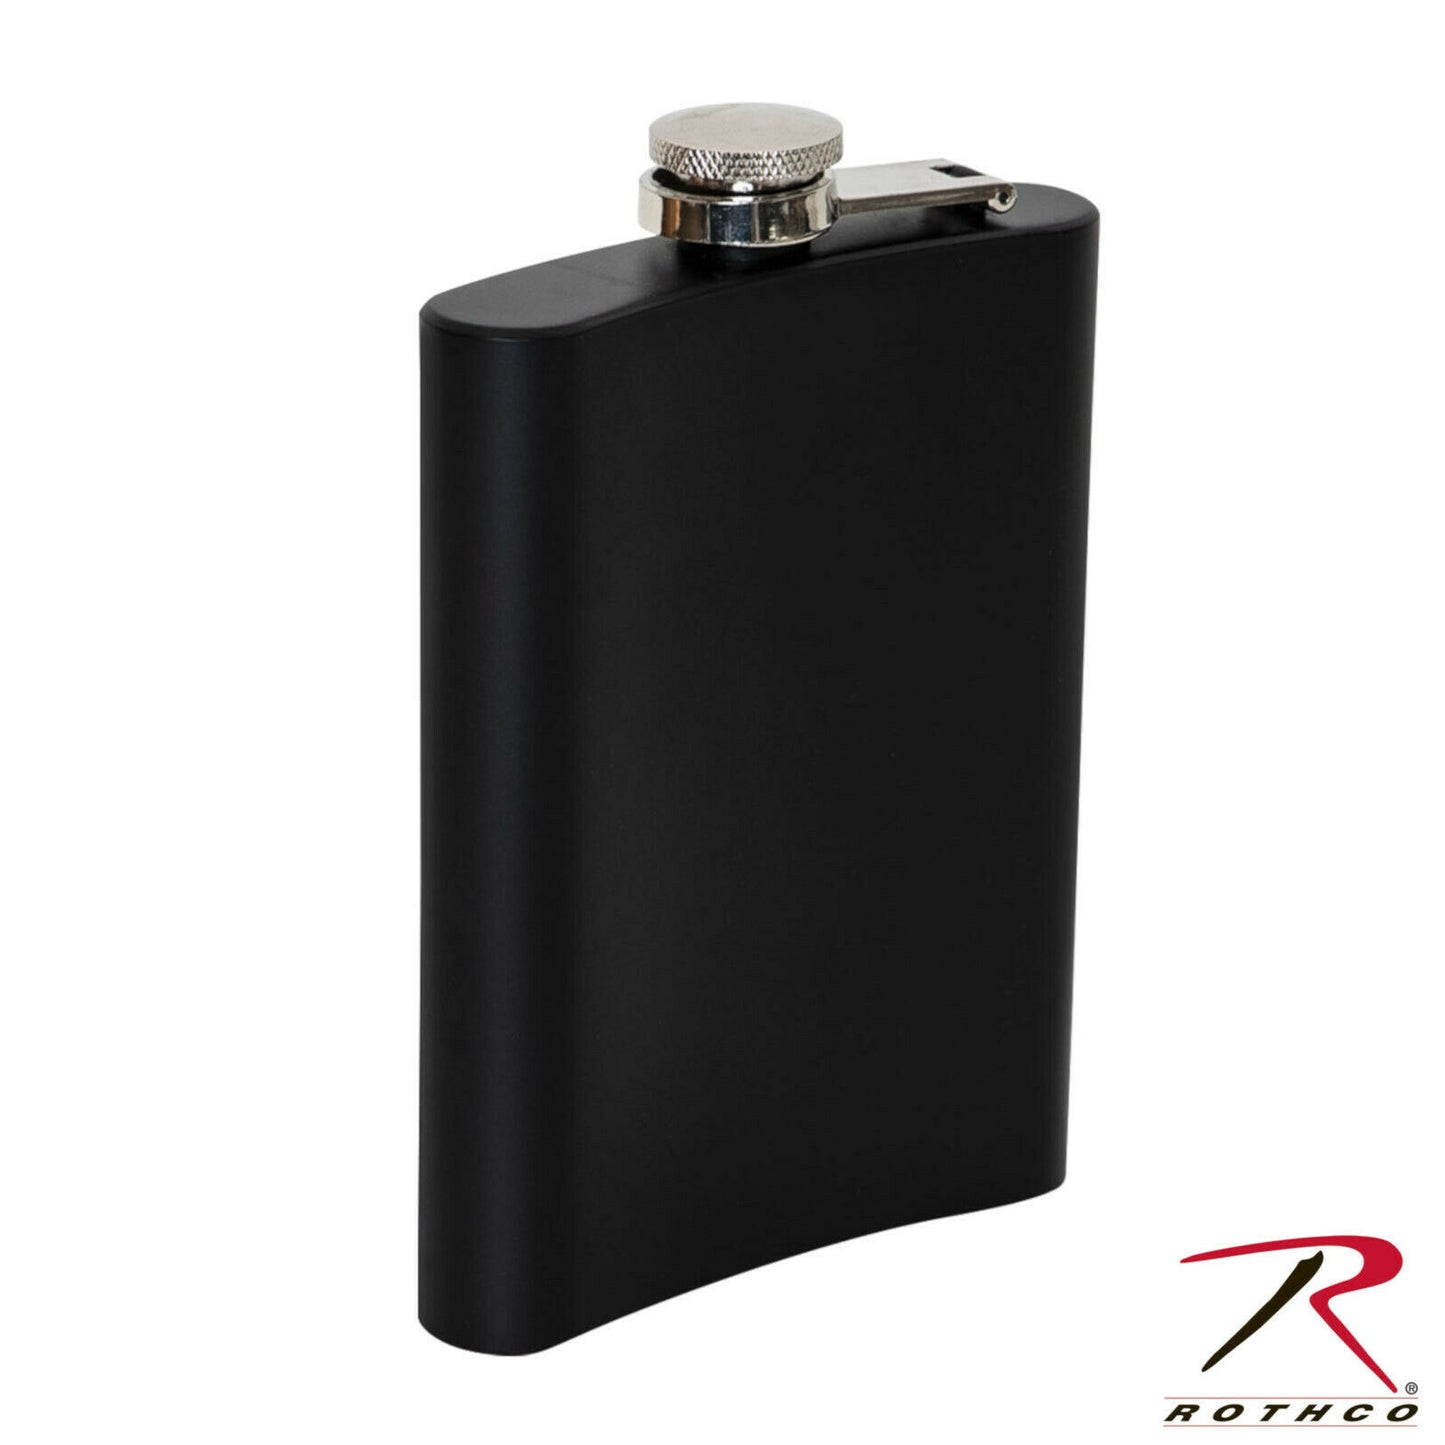 Rothco 8oz. Stainless Steel Black Flask w/ Hinged, Screw-Off Cap - 8 Ounce Flask